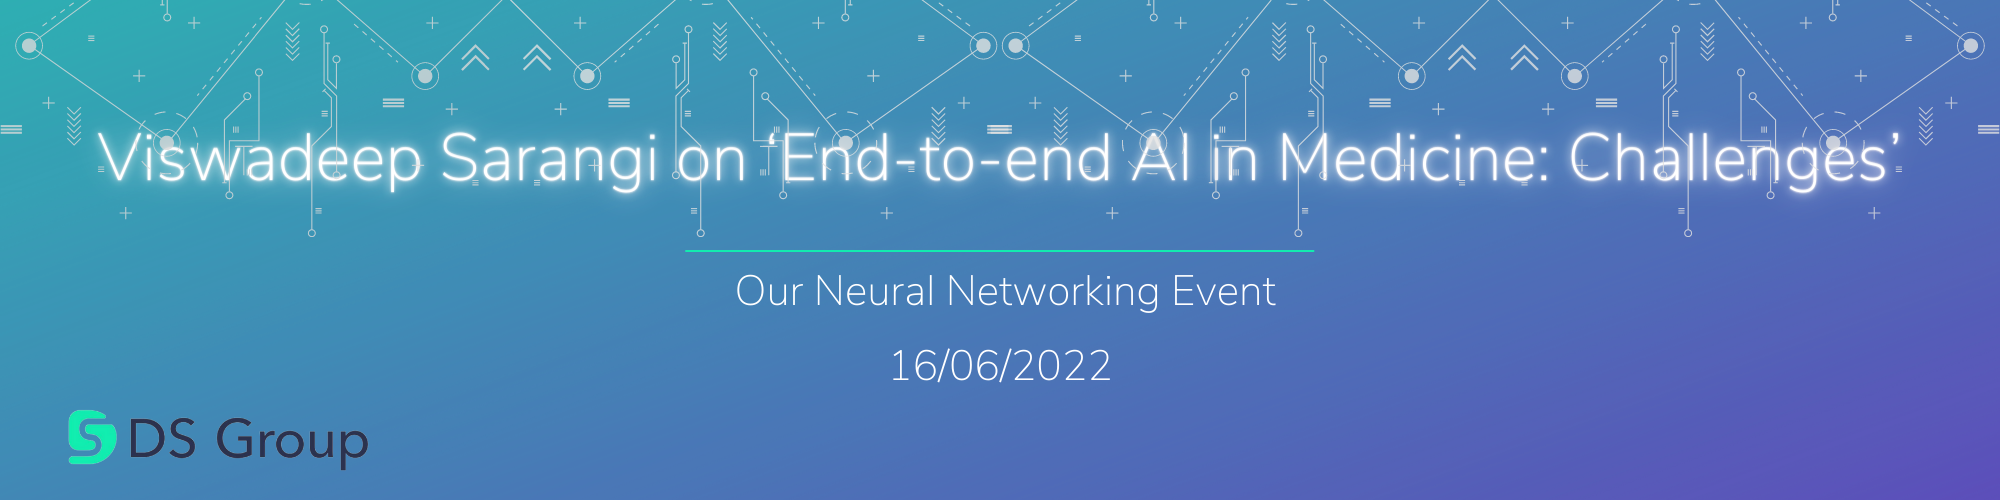 Viswadeep Sarangi on ‘End-to-end AI in Medicine: Challenges’ – Our Neural Networking Event